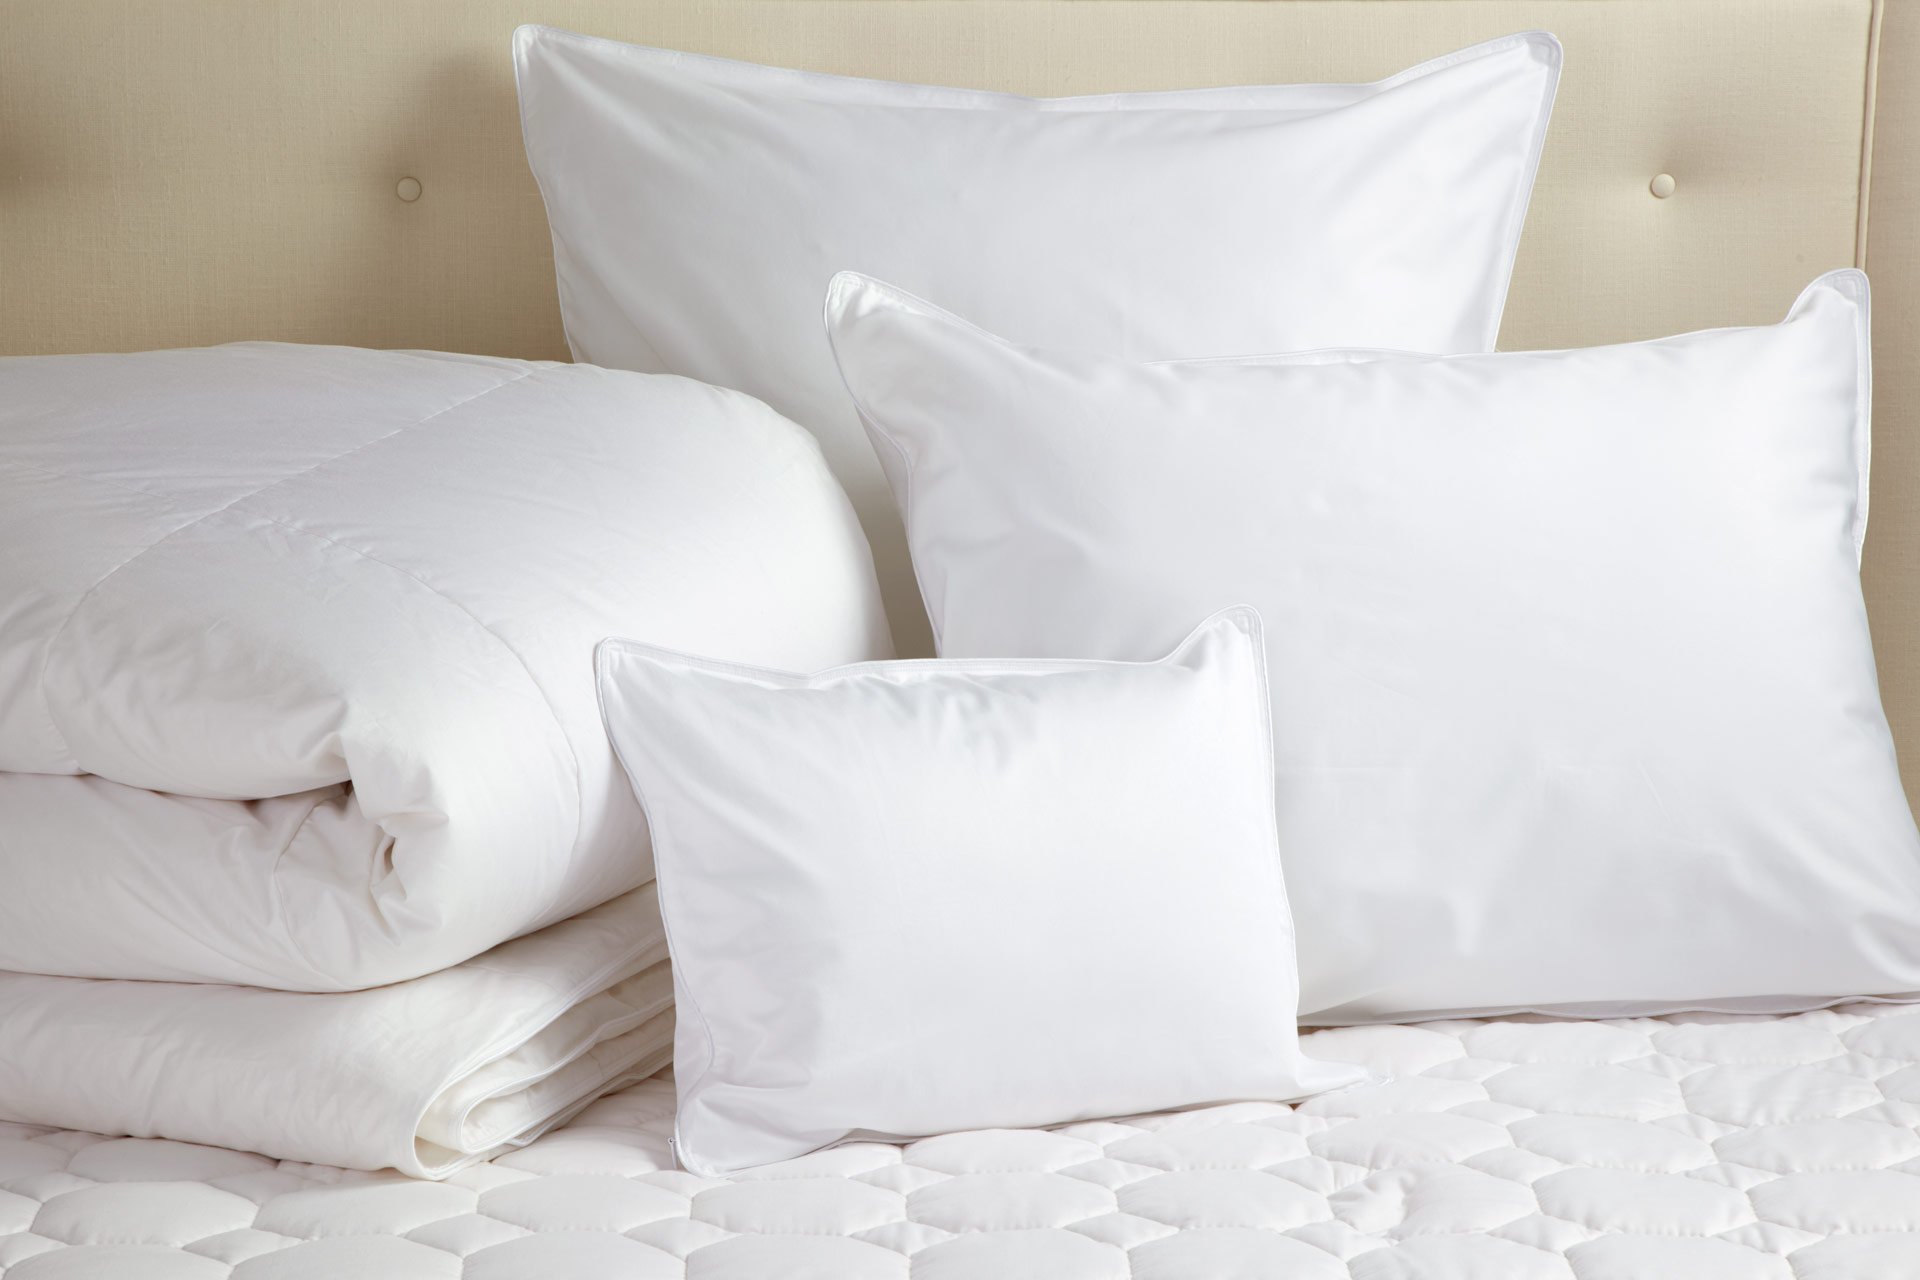 100% White Goose Down Pillows and Comforters on Sale for 25% Off â DEA ...